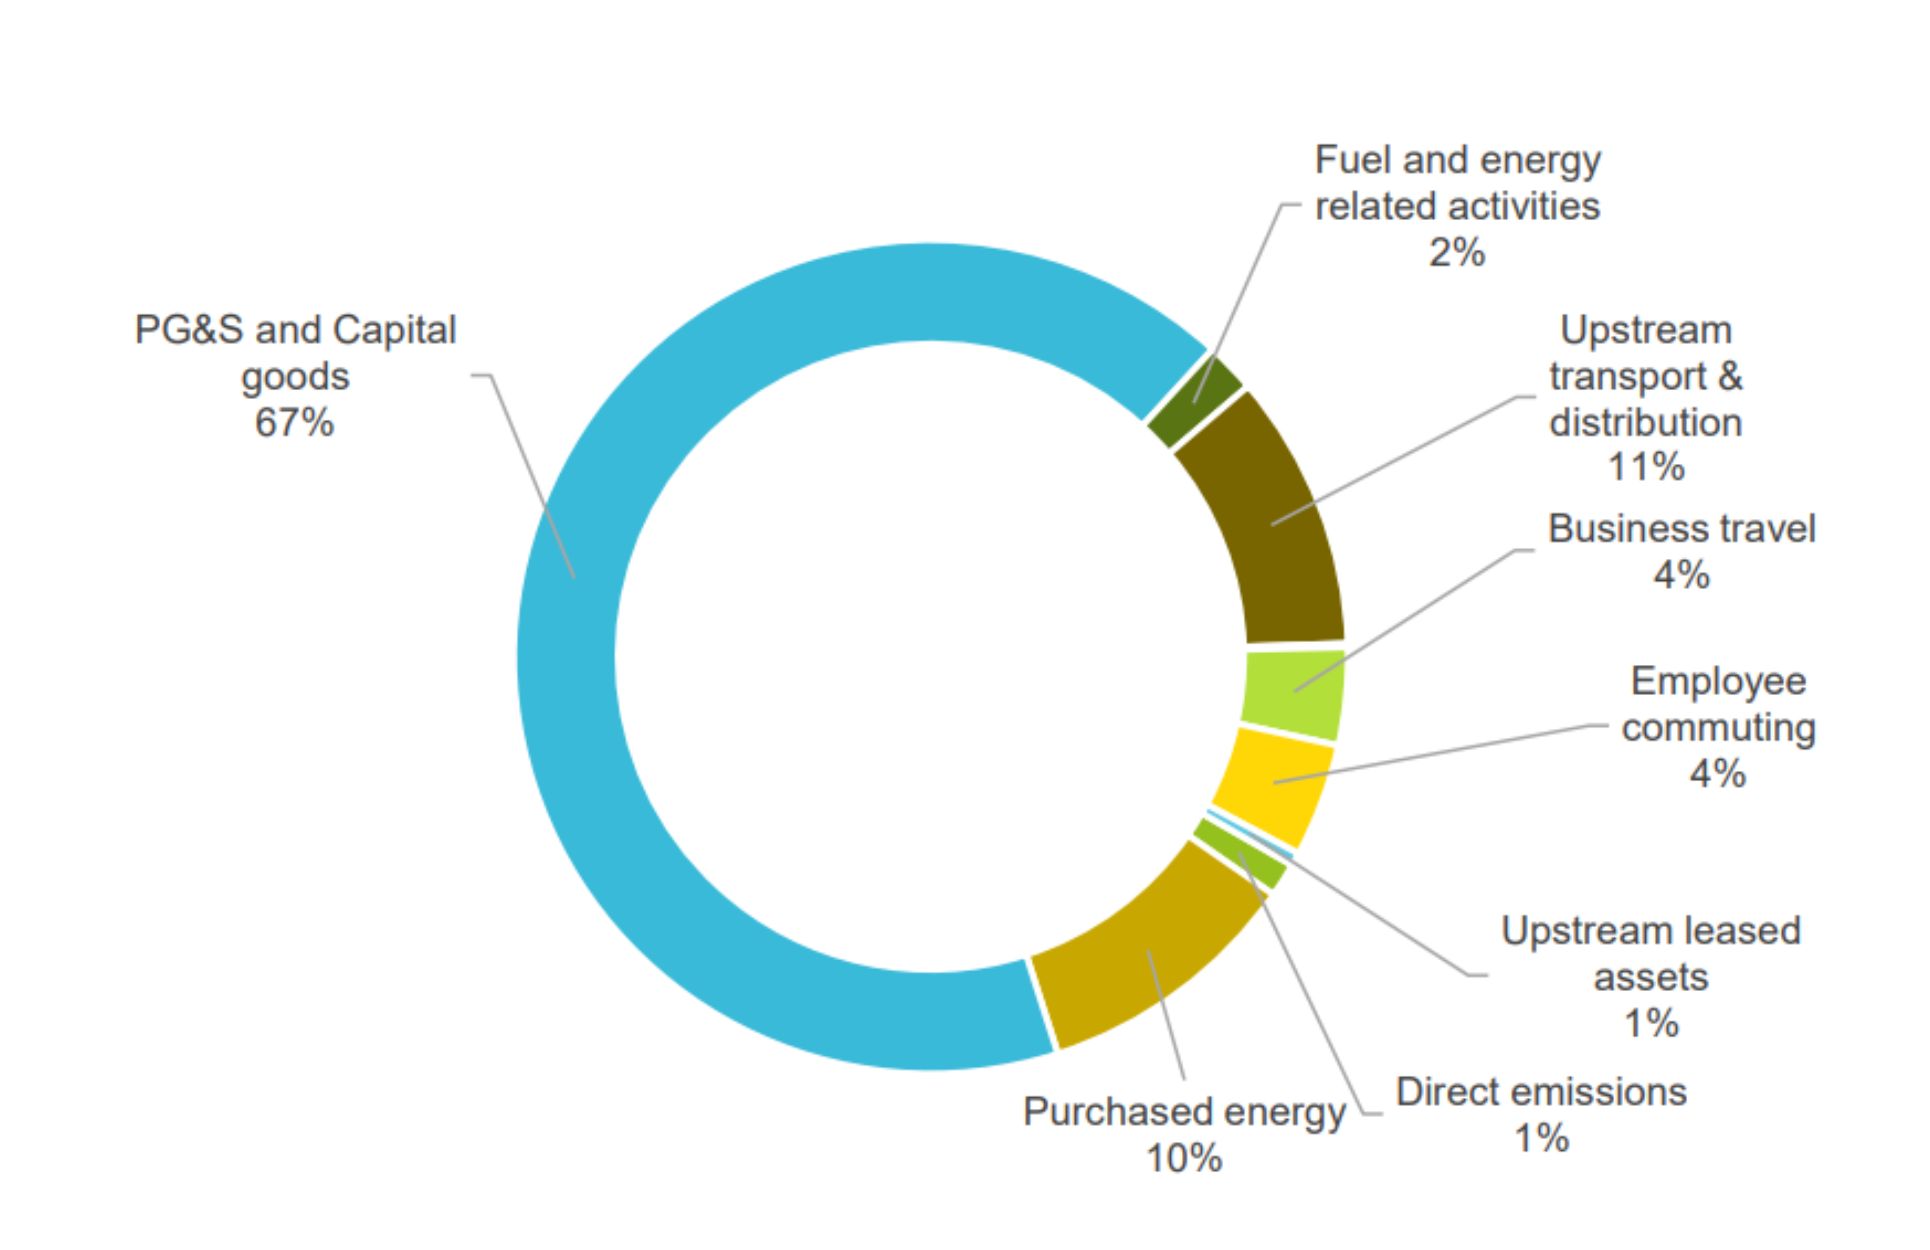 Upstream transport and distribution: 11%, purchased goods and services and capital goods: 67%, business travel: 4%, purchased energy: 10%, employee commuting: 4%, fuel and energy related activities: 2%, direct emissions: 1%, upstream leased assets: 1%